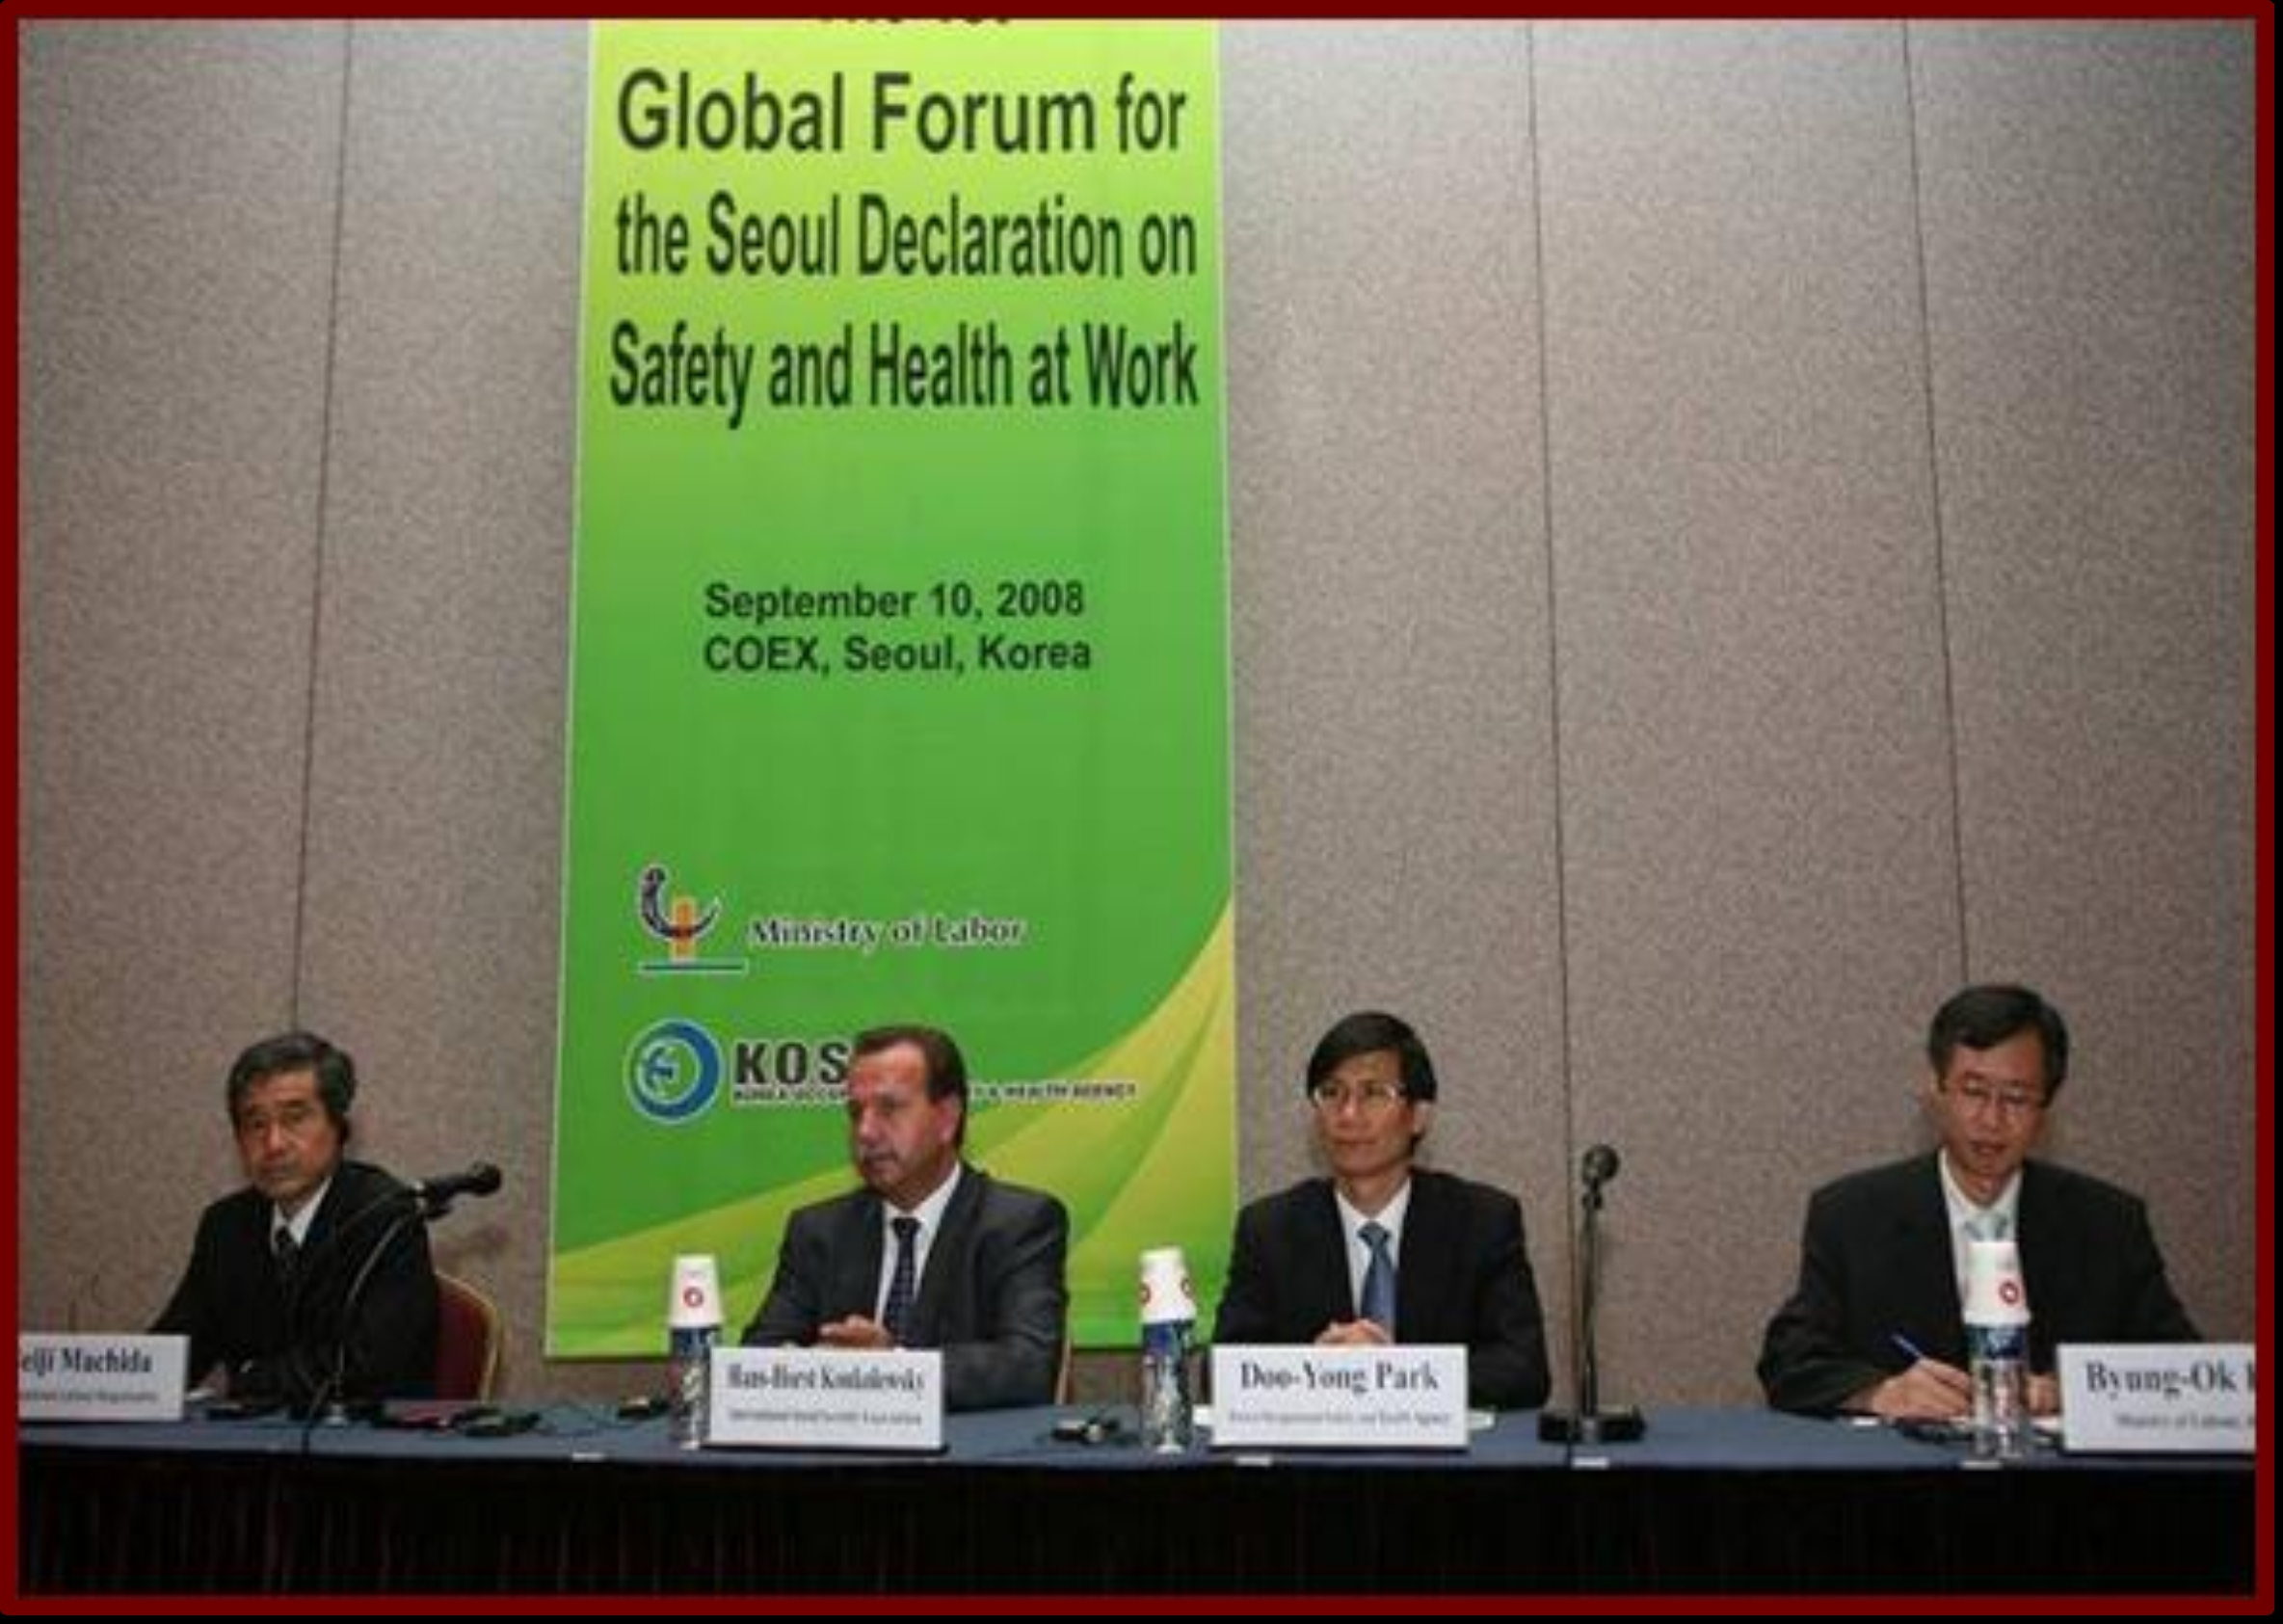 The Global Forum on the Seoul Declaration on Safety and Health at Work